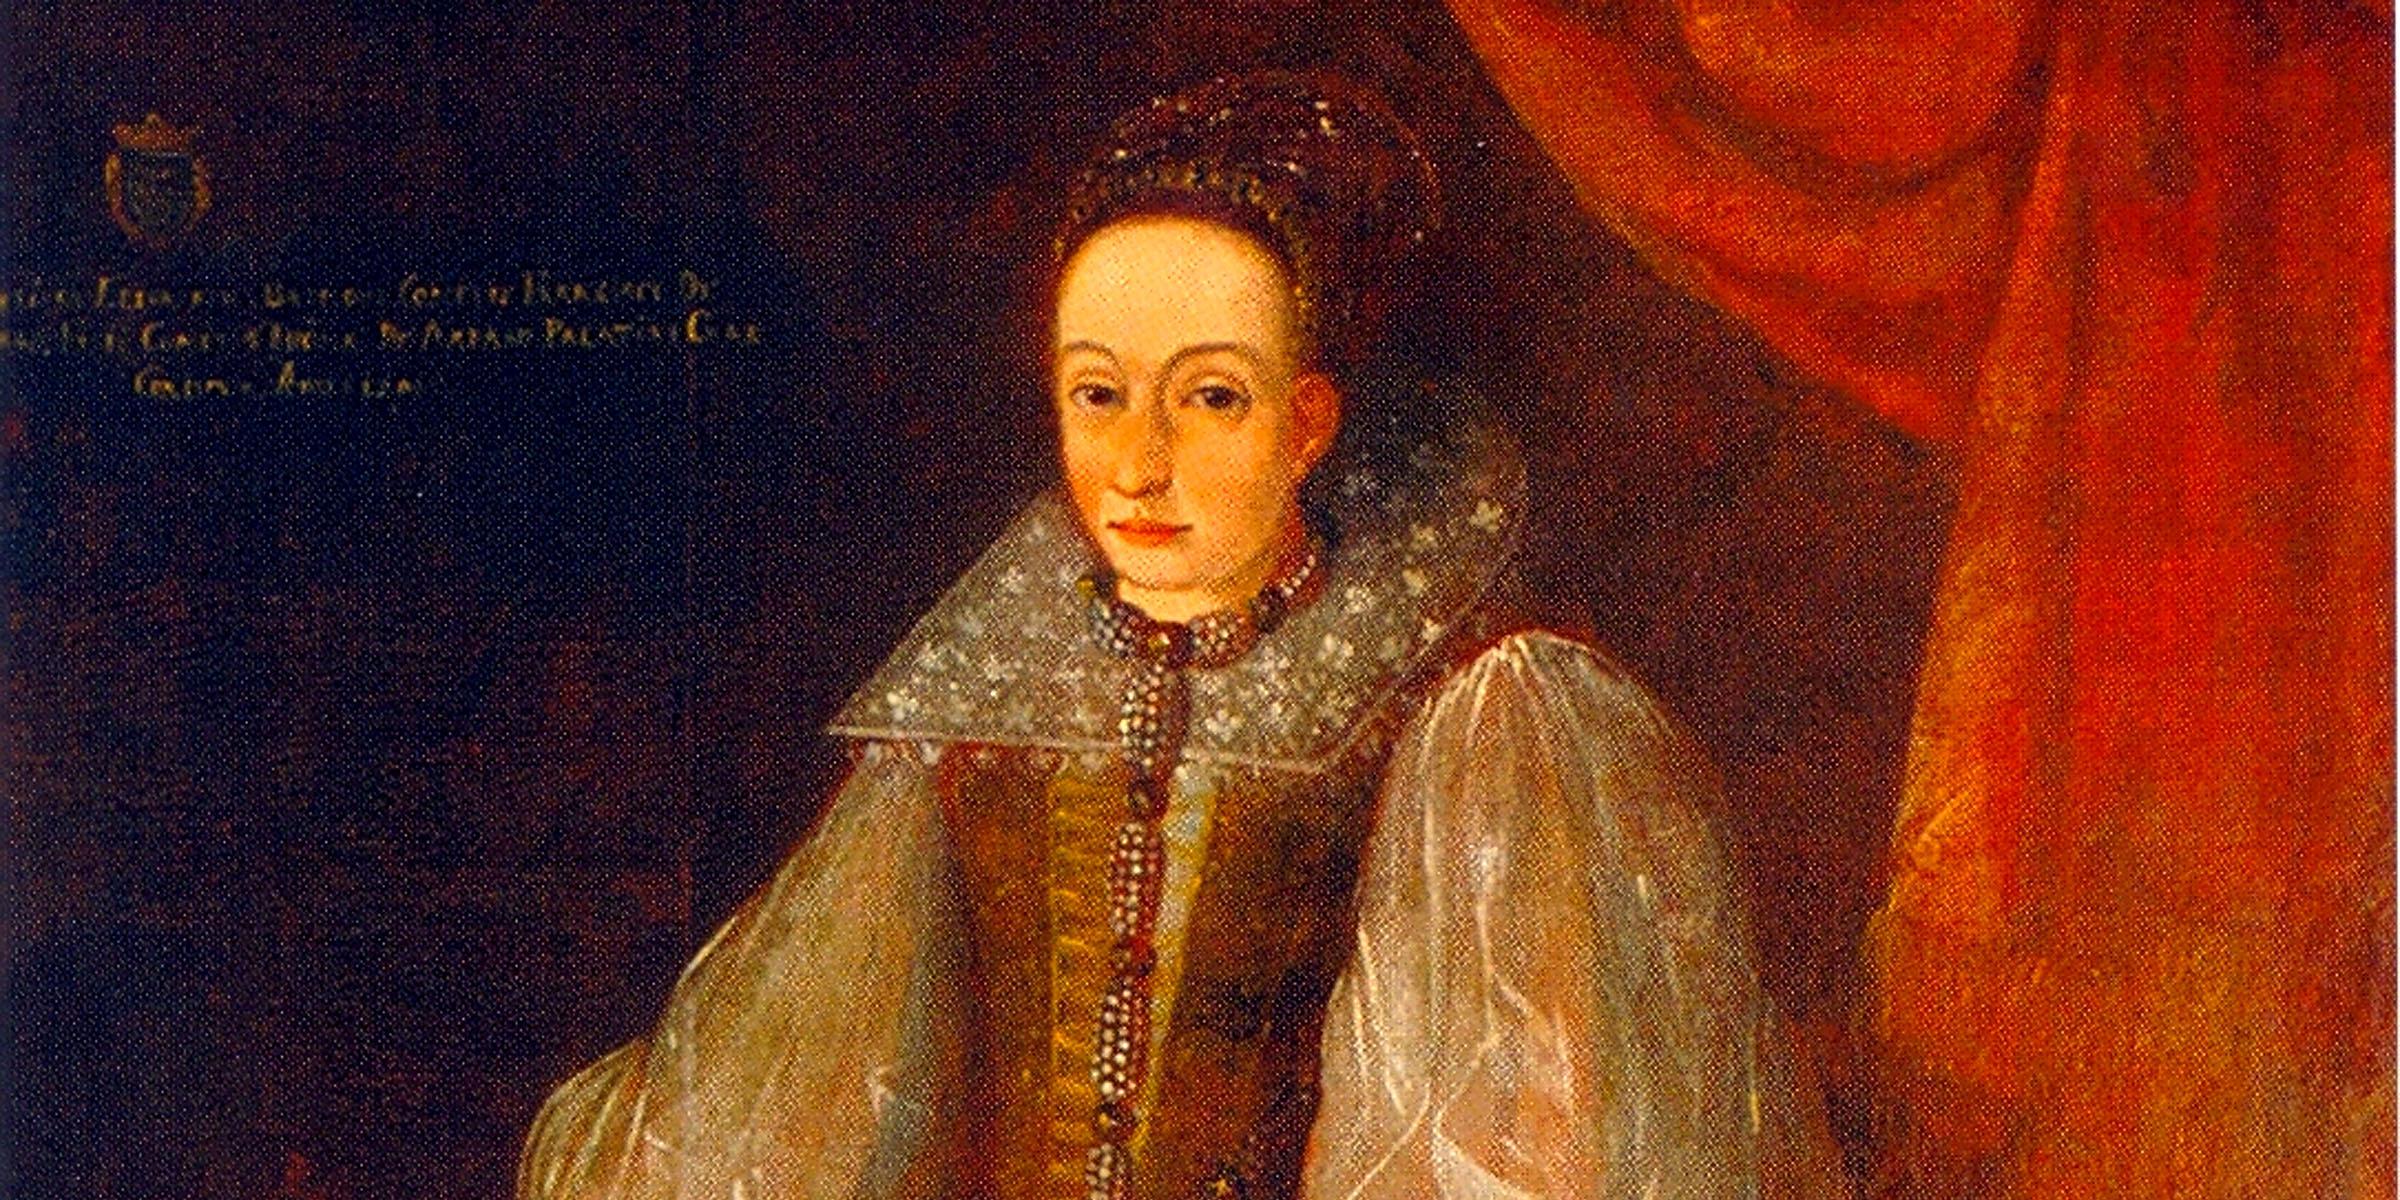 9. Elizabeth Bathory
She murdered some 600 young virgin girls and then bathed in their blood to become younger and get better her complexion. She was wedged and bricked into her own house till death.